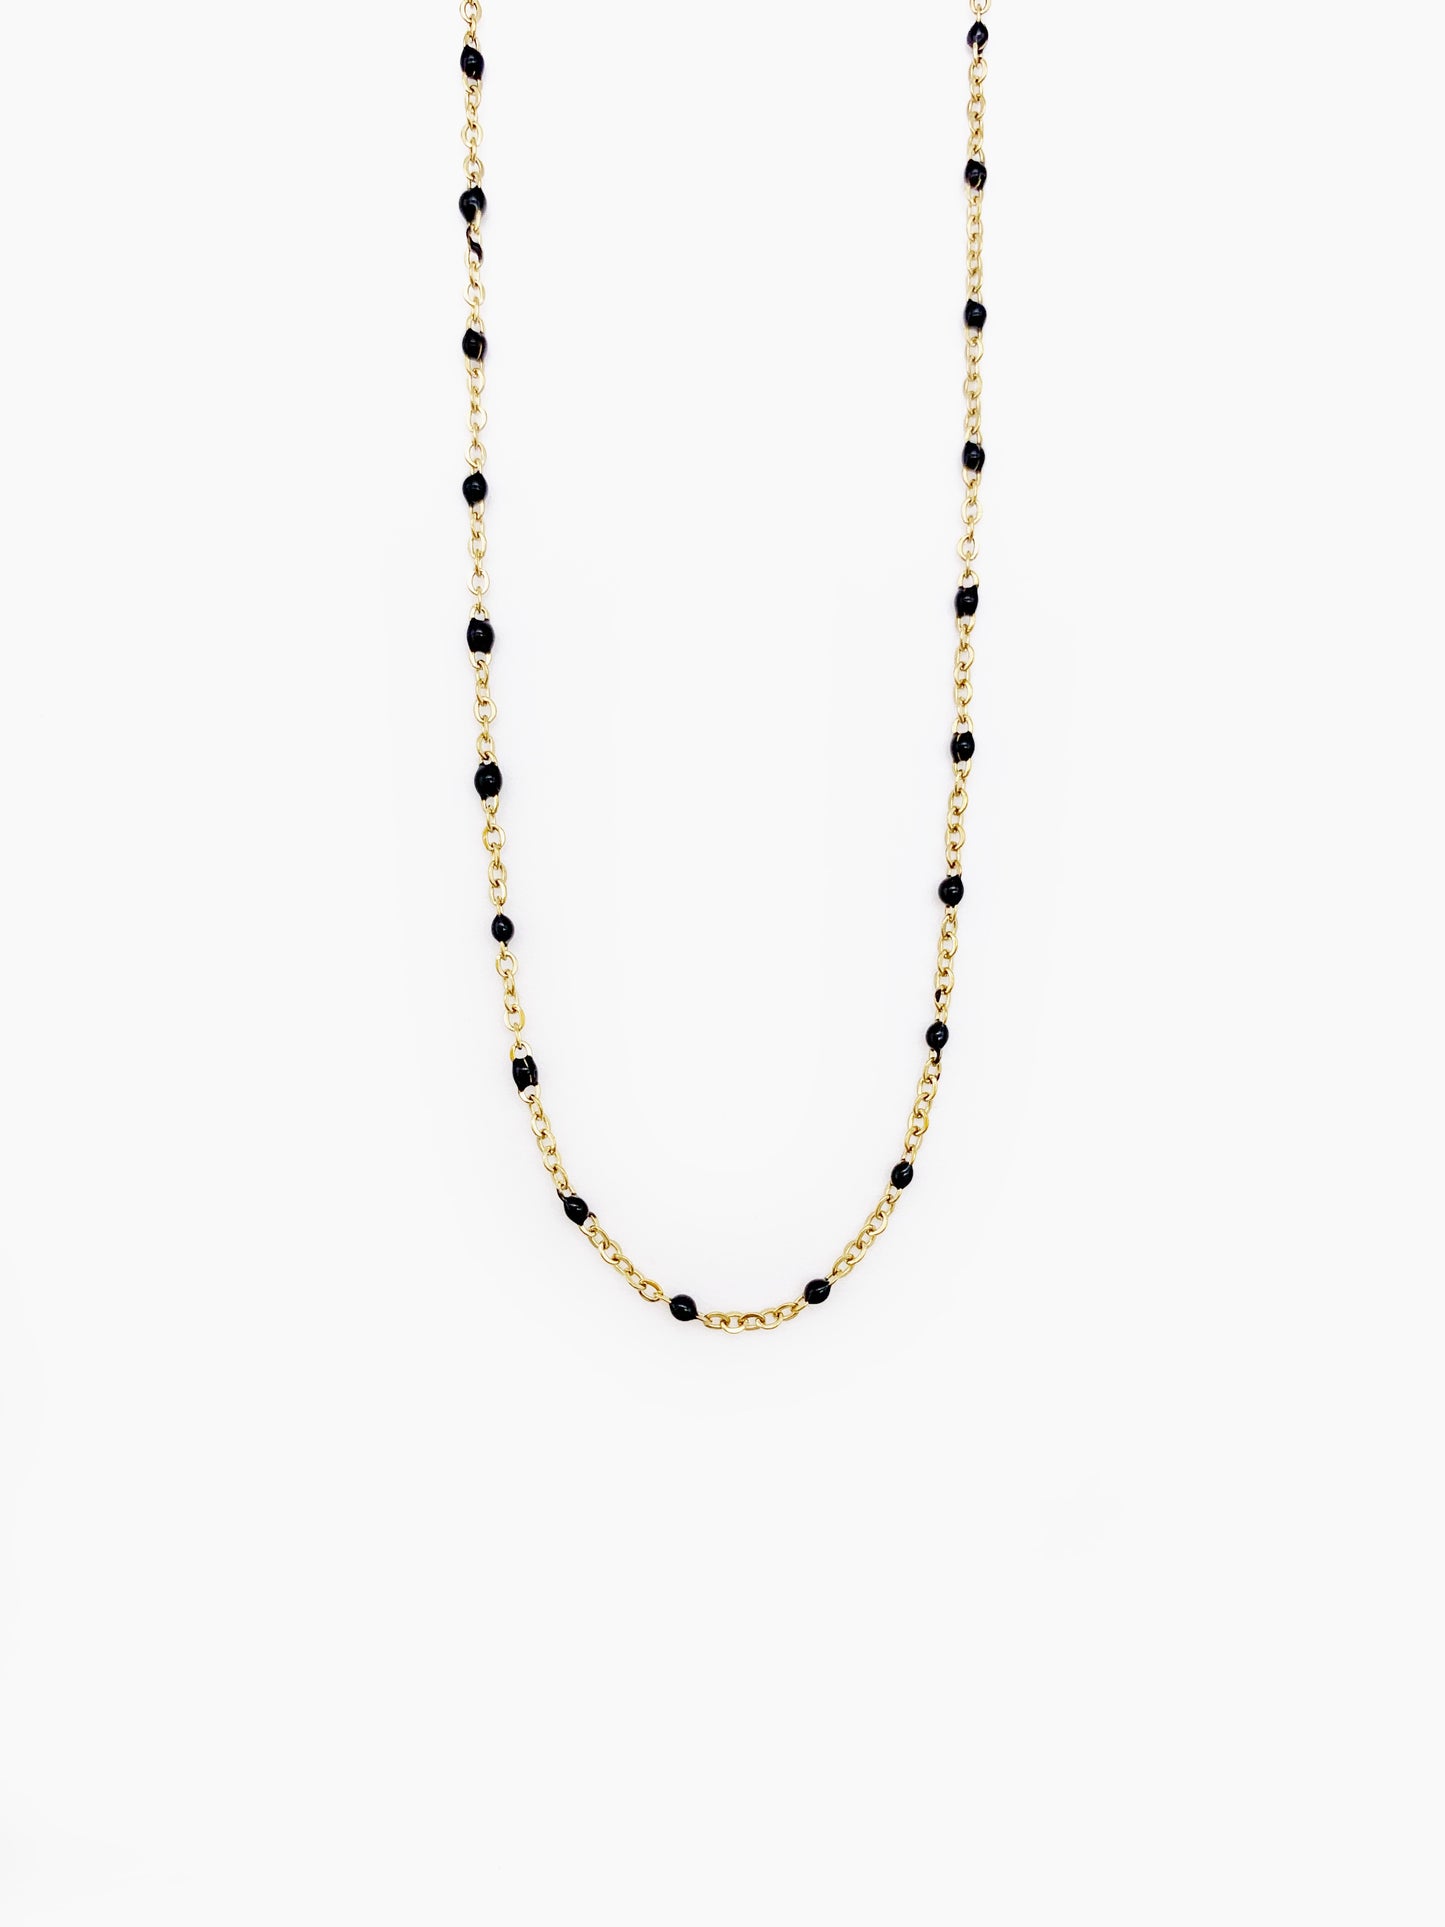 BLACK BALL NECKLACE